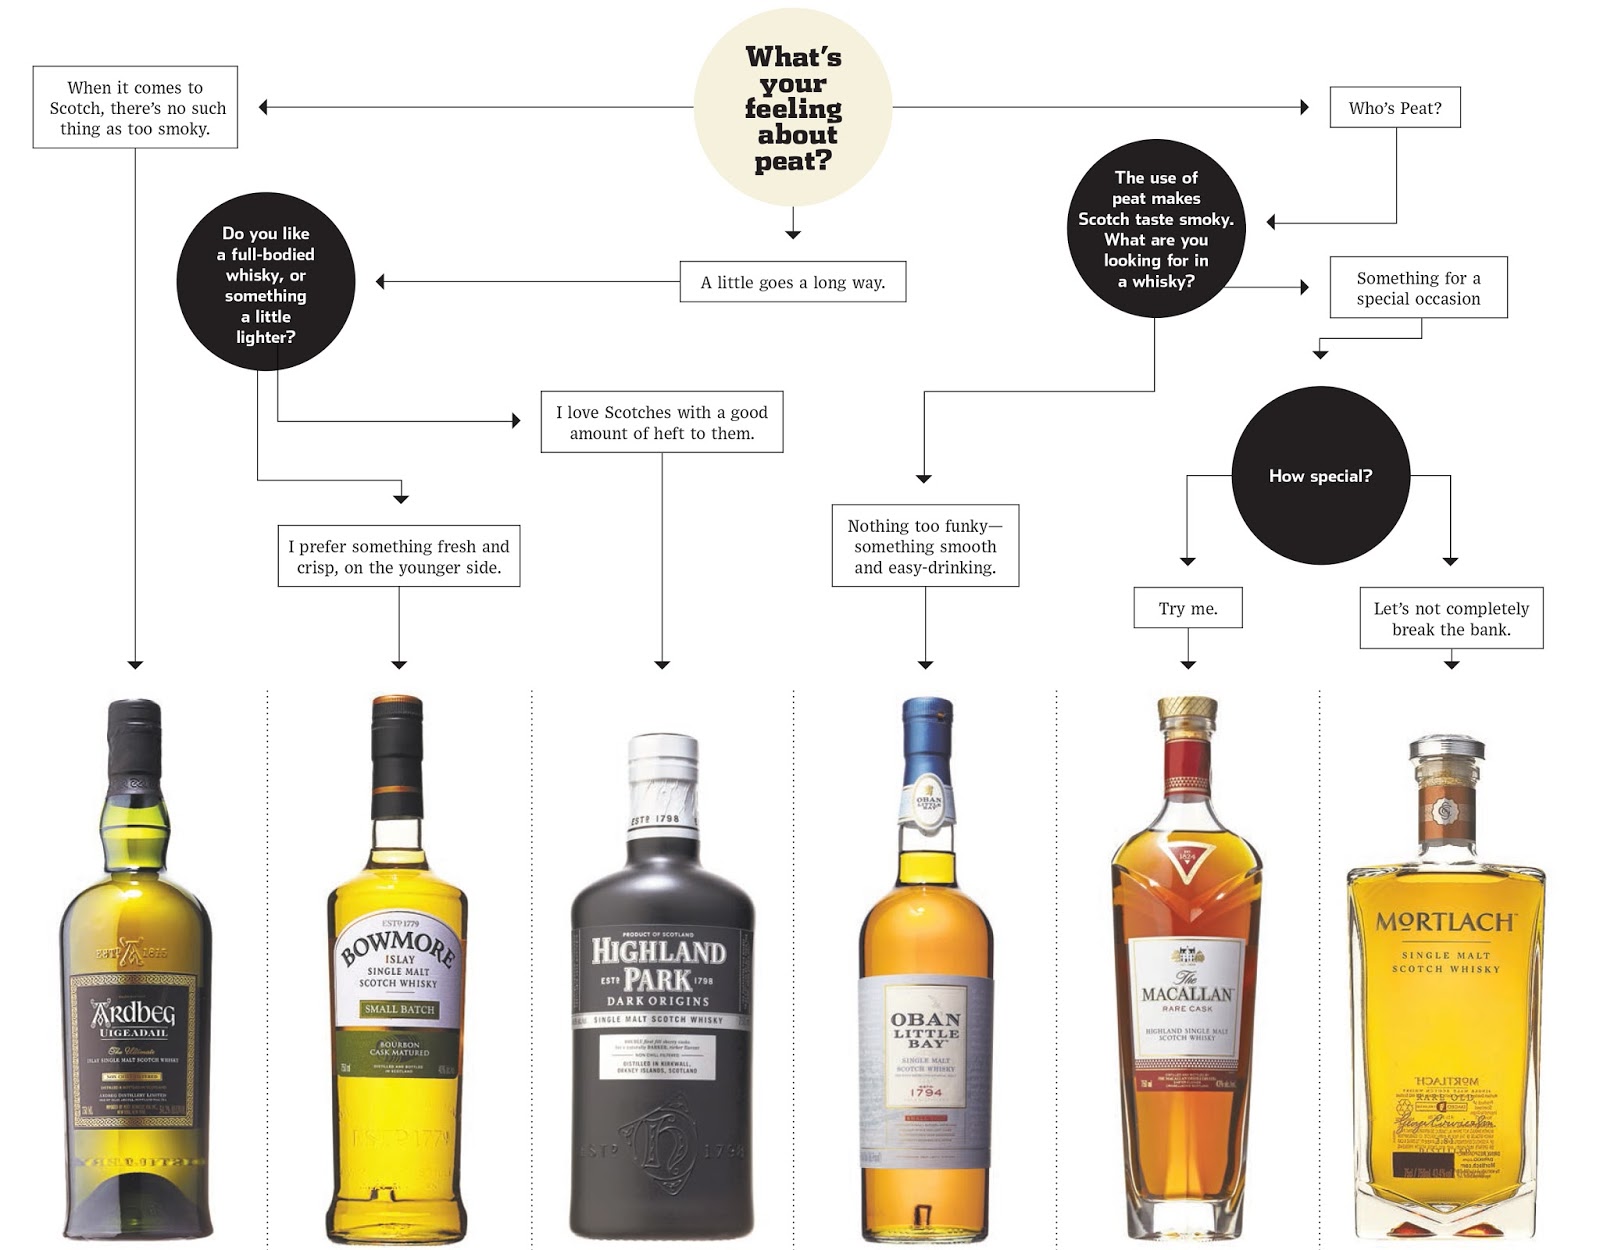 amciu.info: Whats the difference between scotch, whiskey and bourbon?